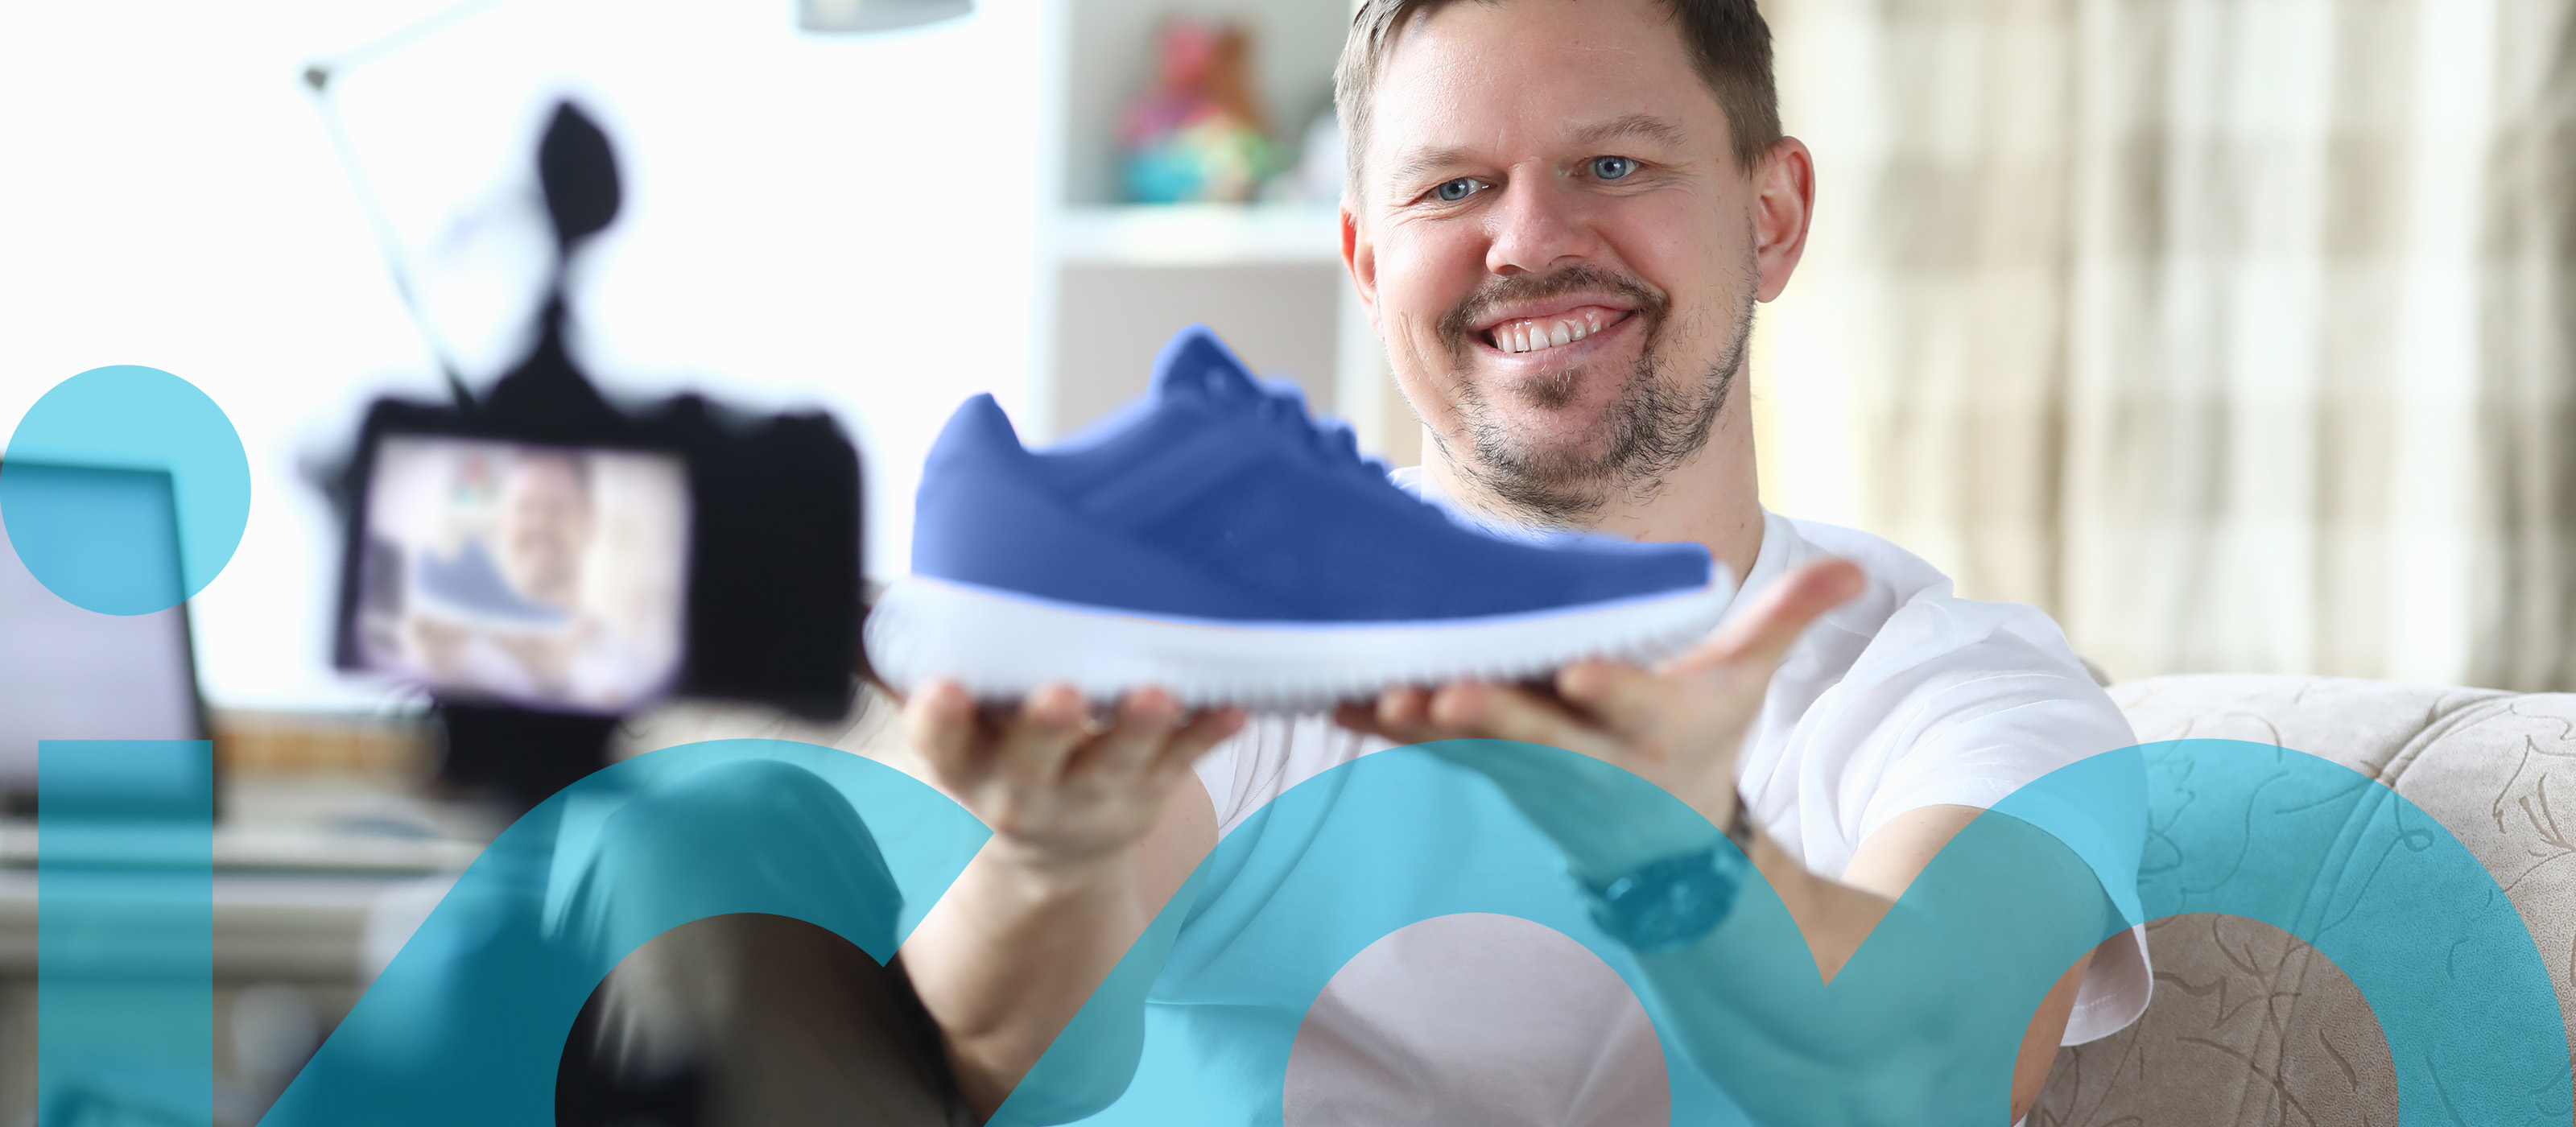 A man holding a sneaker up to a camera